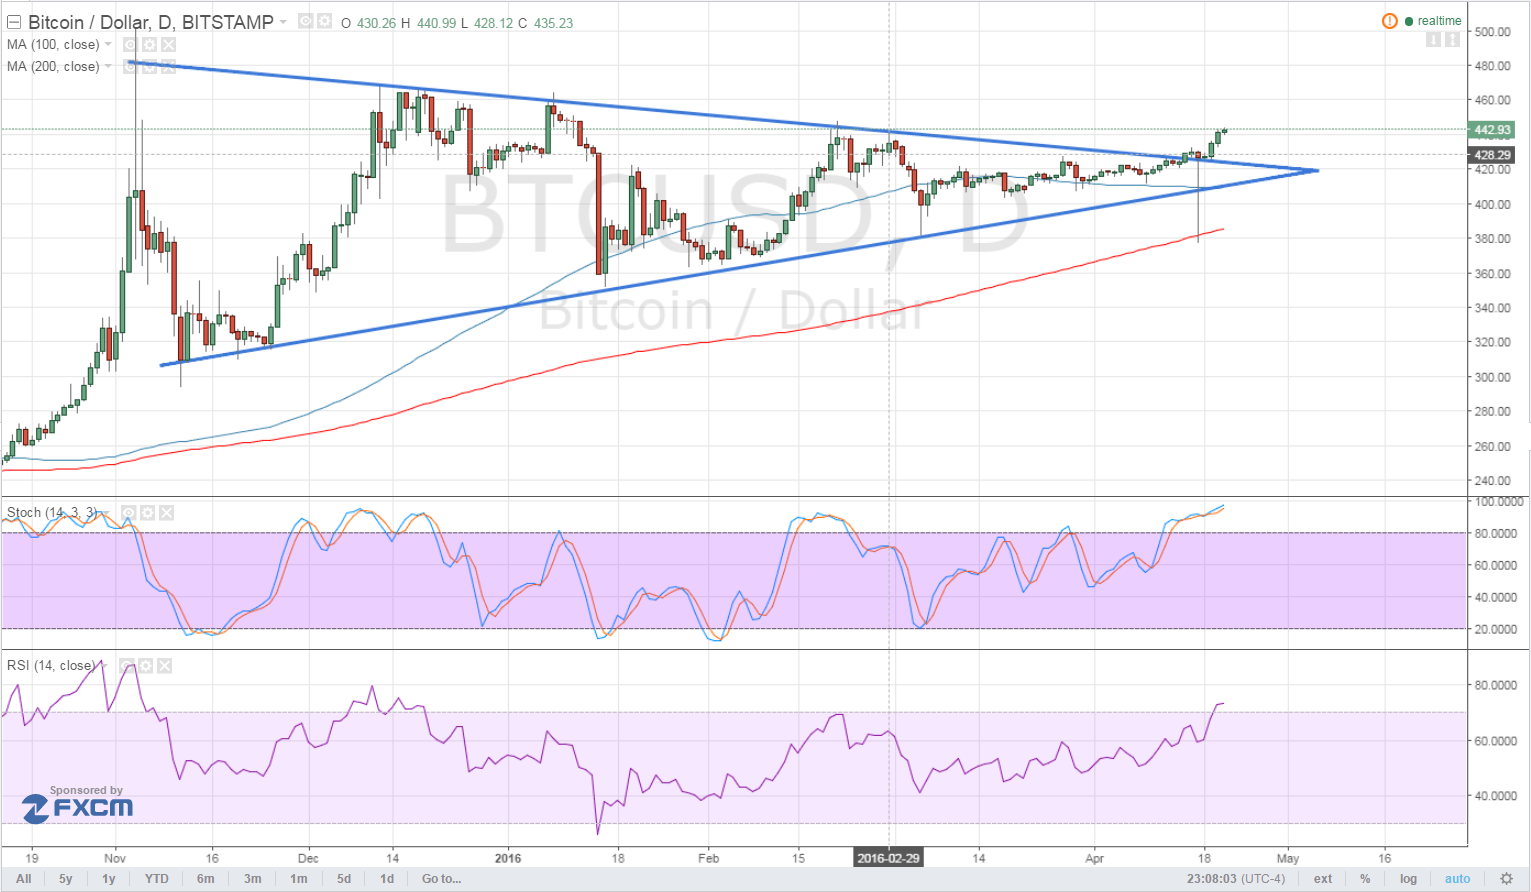 Bitcoin Price Technical Analysis for 04/21/2016 - Long-Term Triangle Breakout?